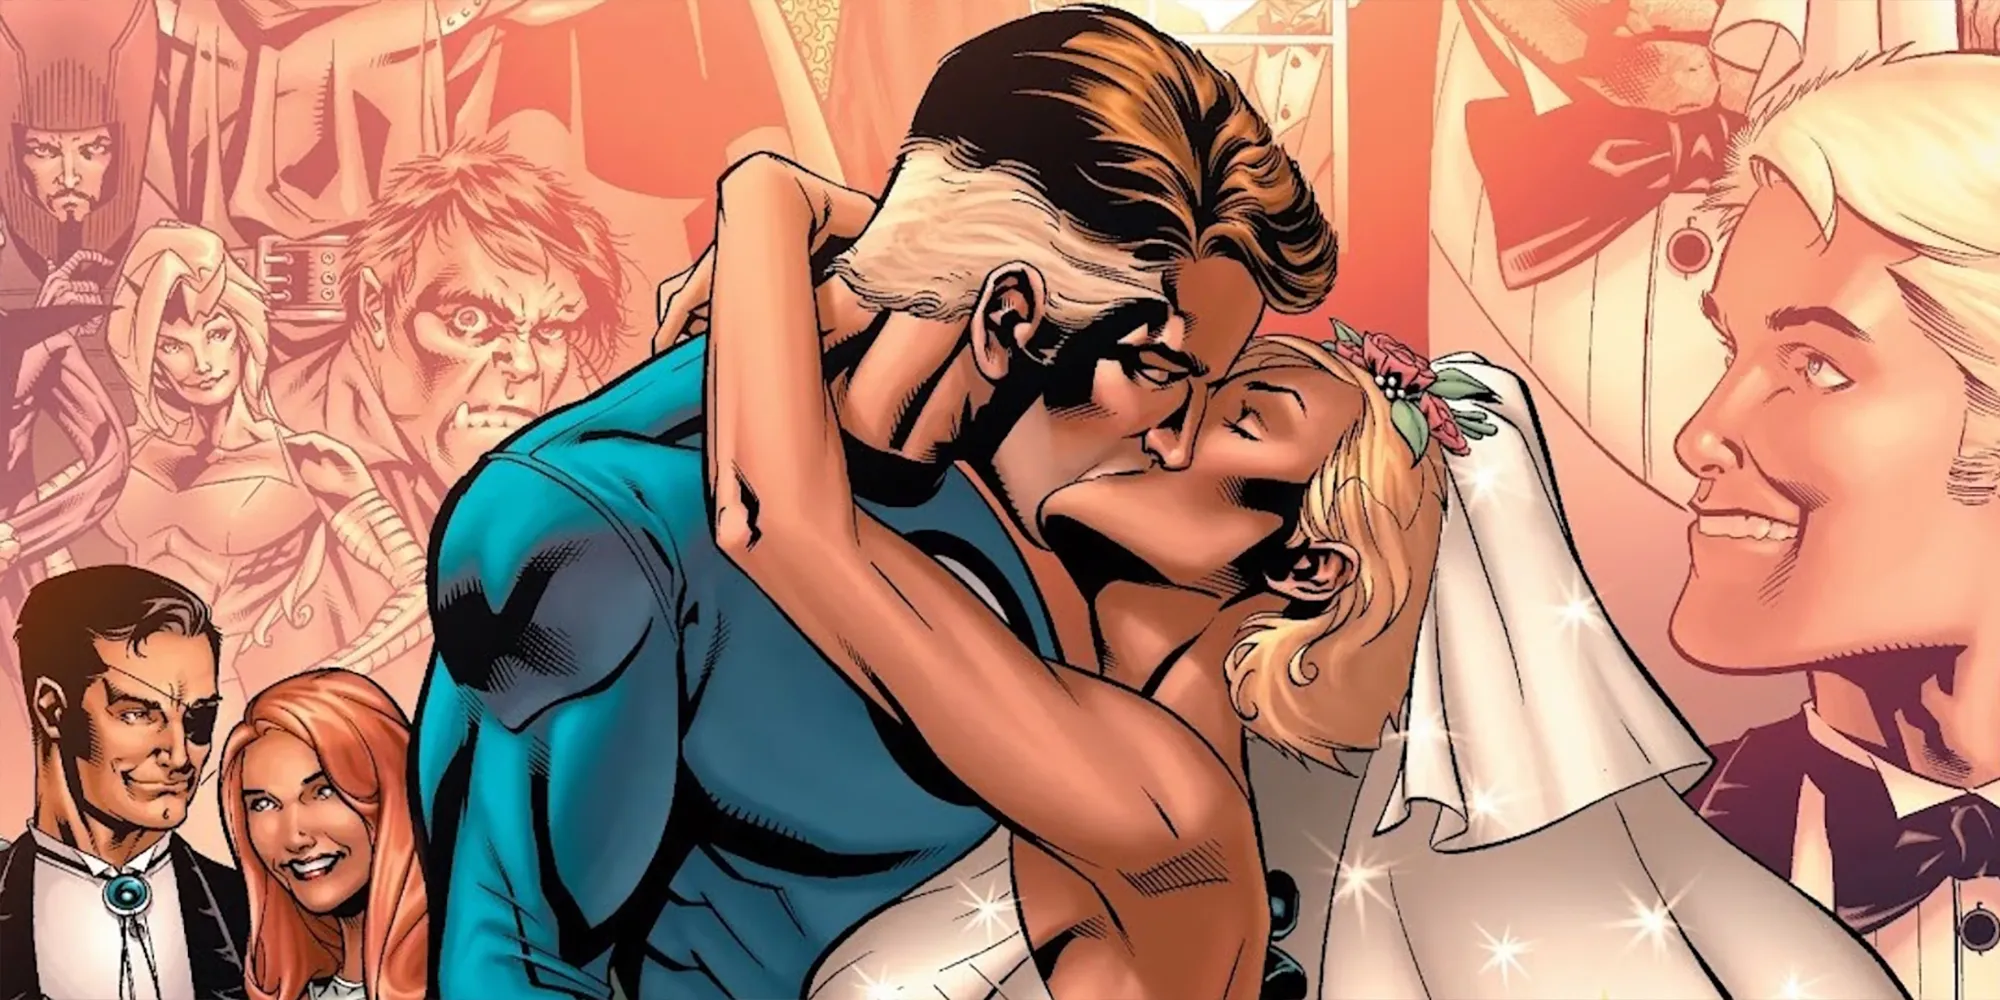 Reed Richards & Sue Storm